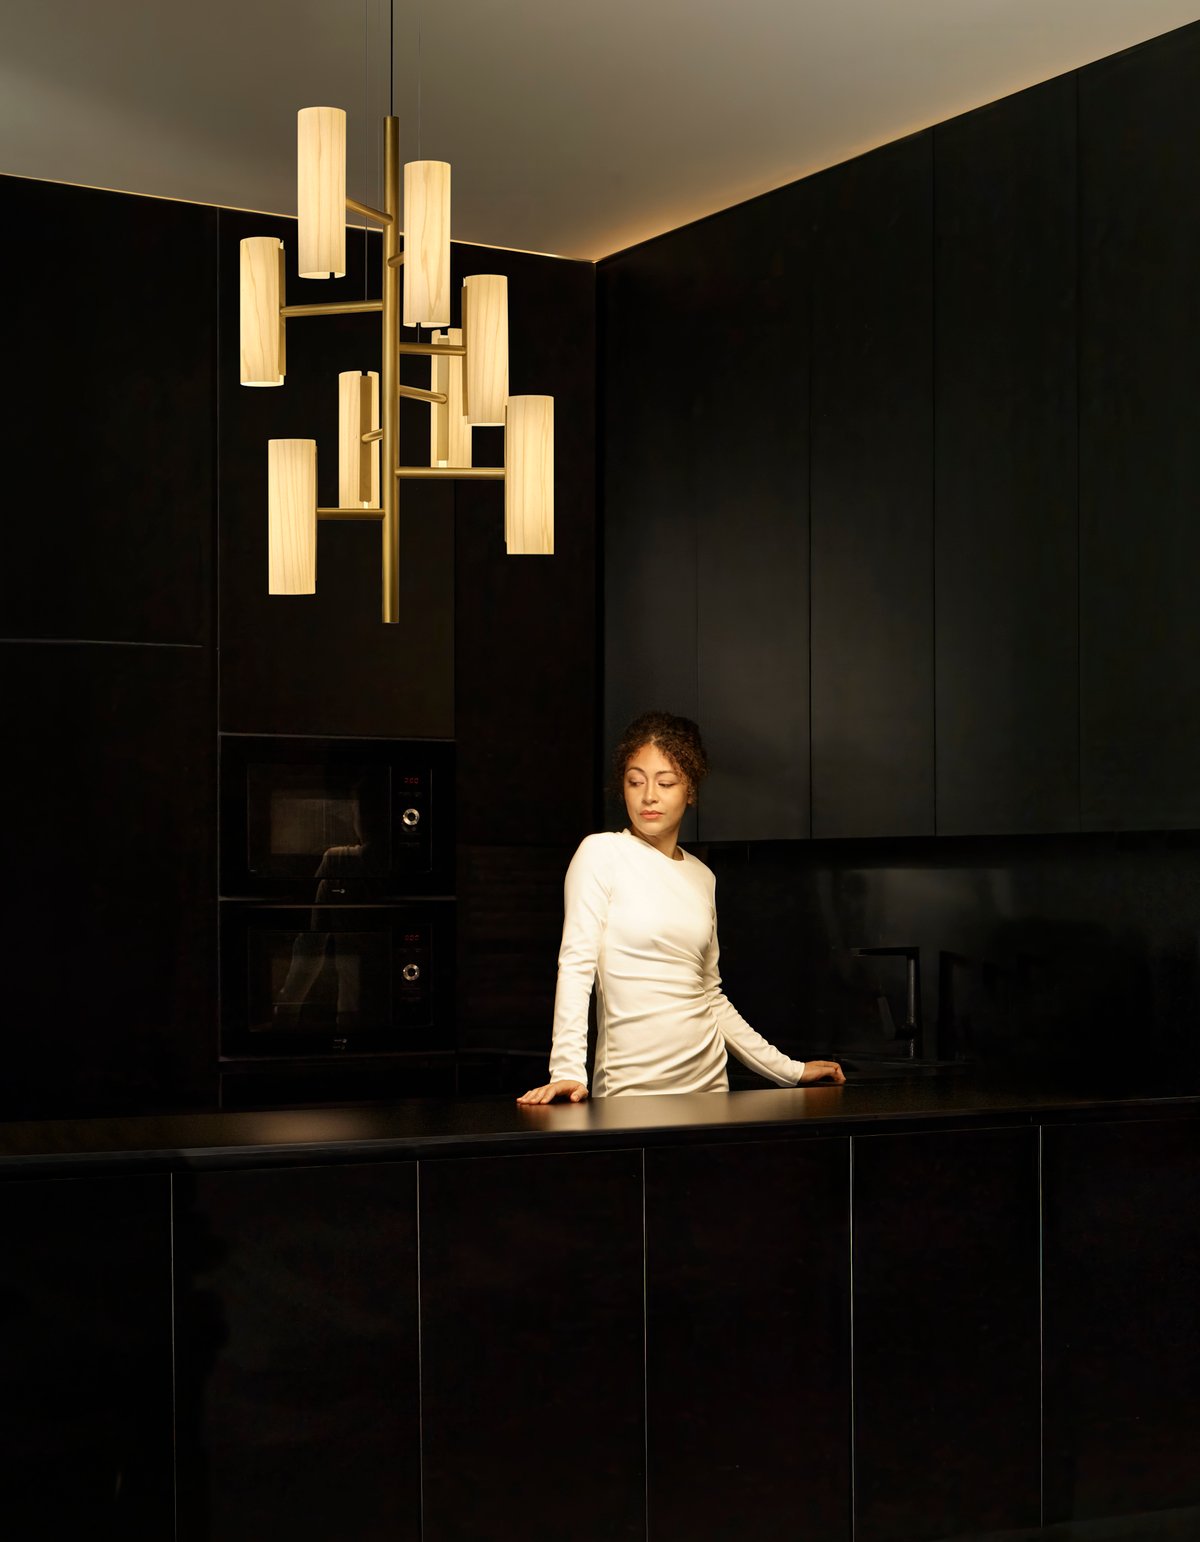 elegantly illuminated-kitchen-with-the-Black-Note-Chandelier-design-by-Ramón-Esteve-made-of-wood-veneer-and-metal